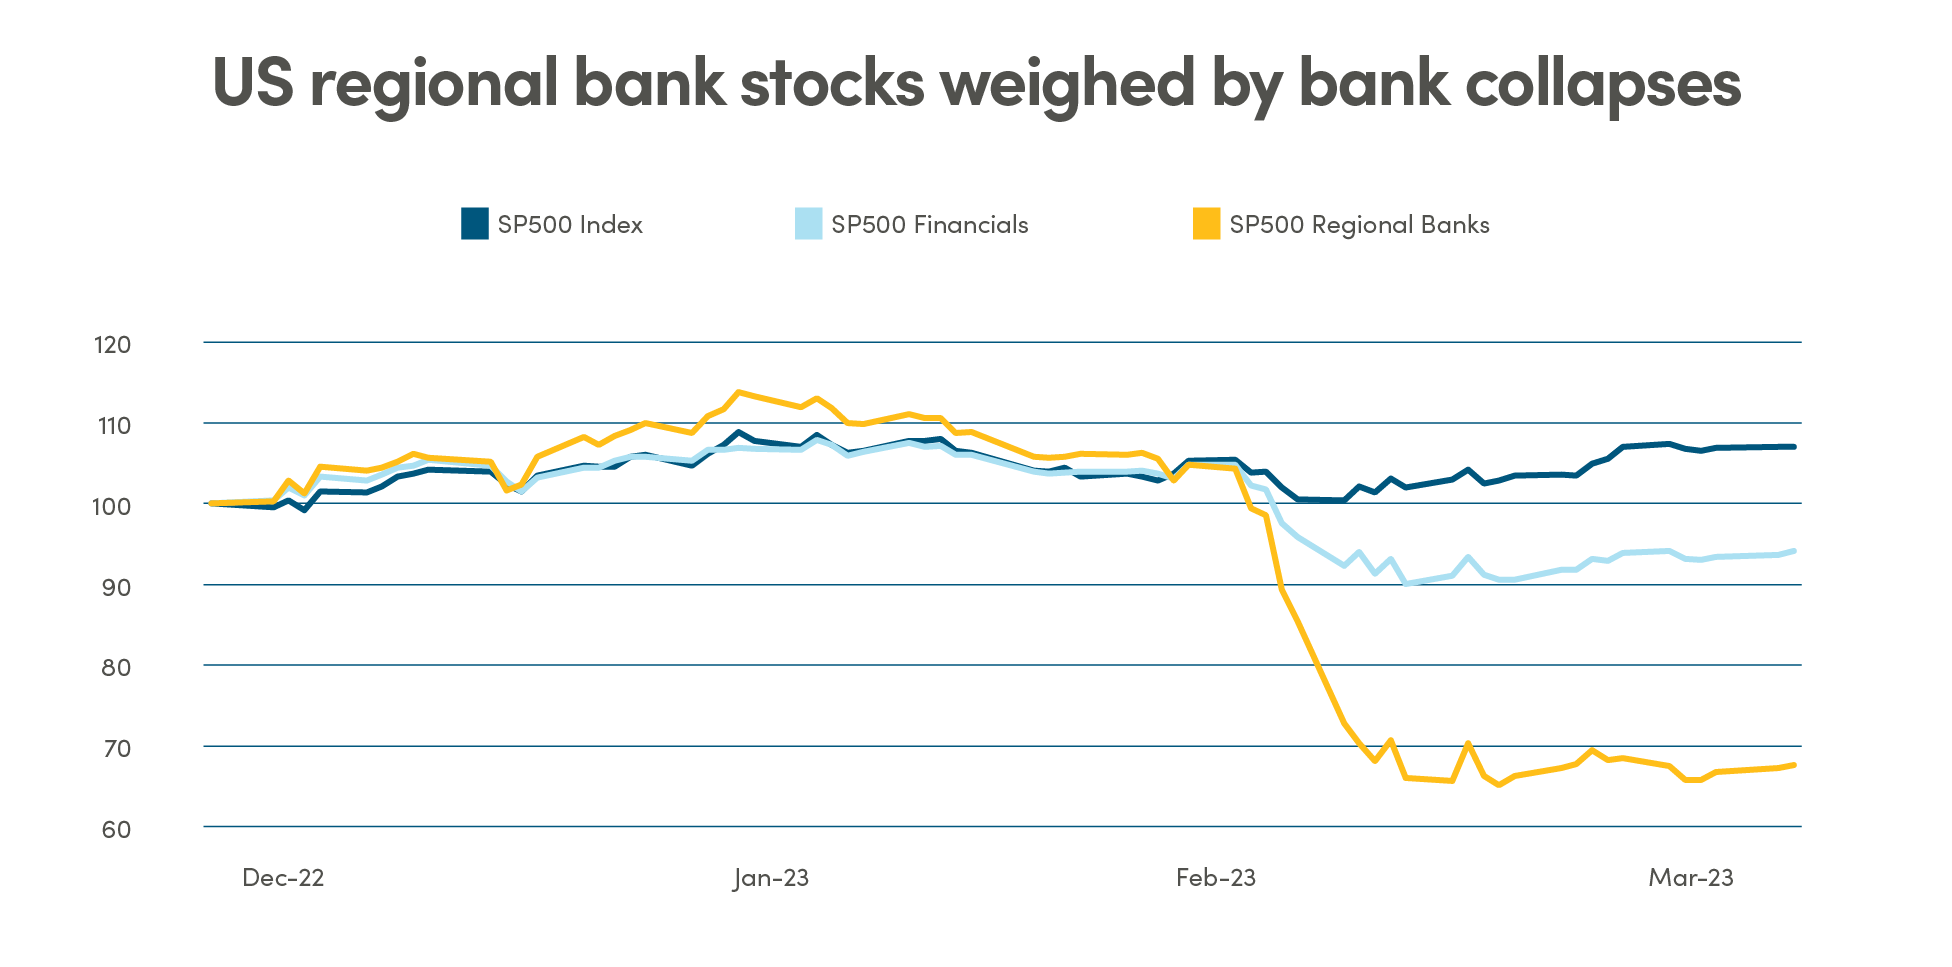 Line graph showing US regional bank stocks weighed by bank collapses, from December 2022 to March 2023. Comparison of SP500, SP500 Financials and SP500 Regional Banks.